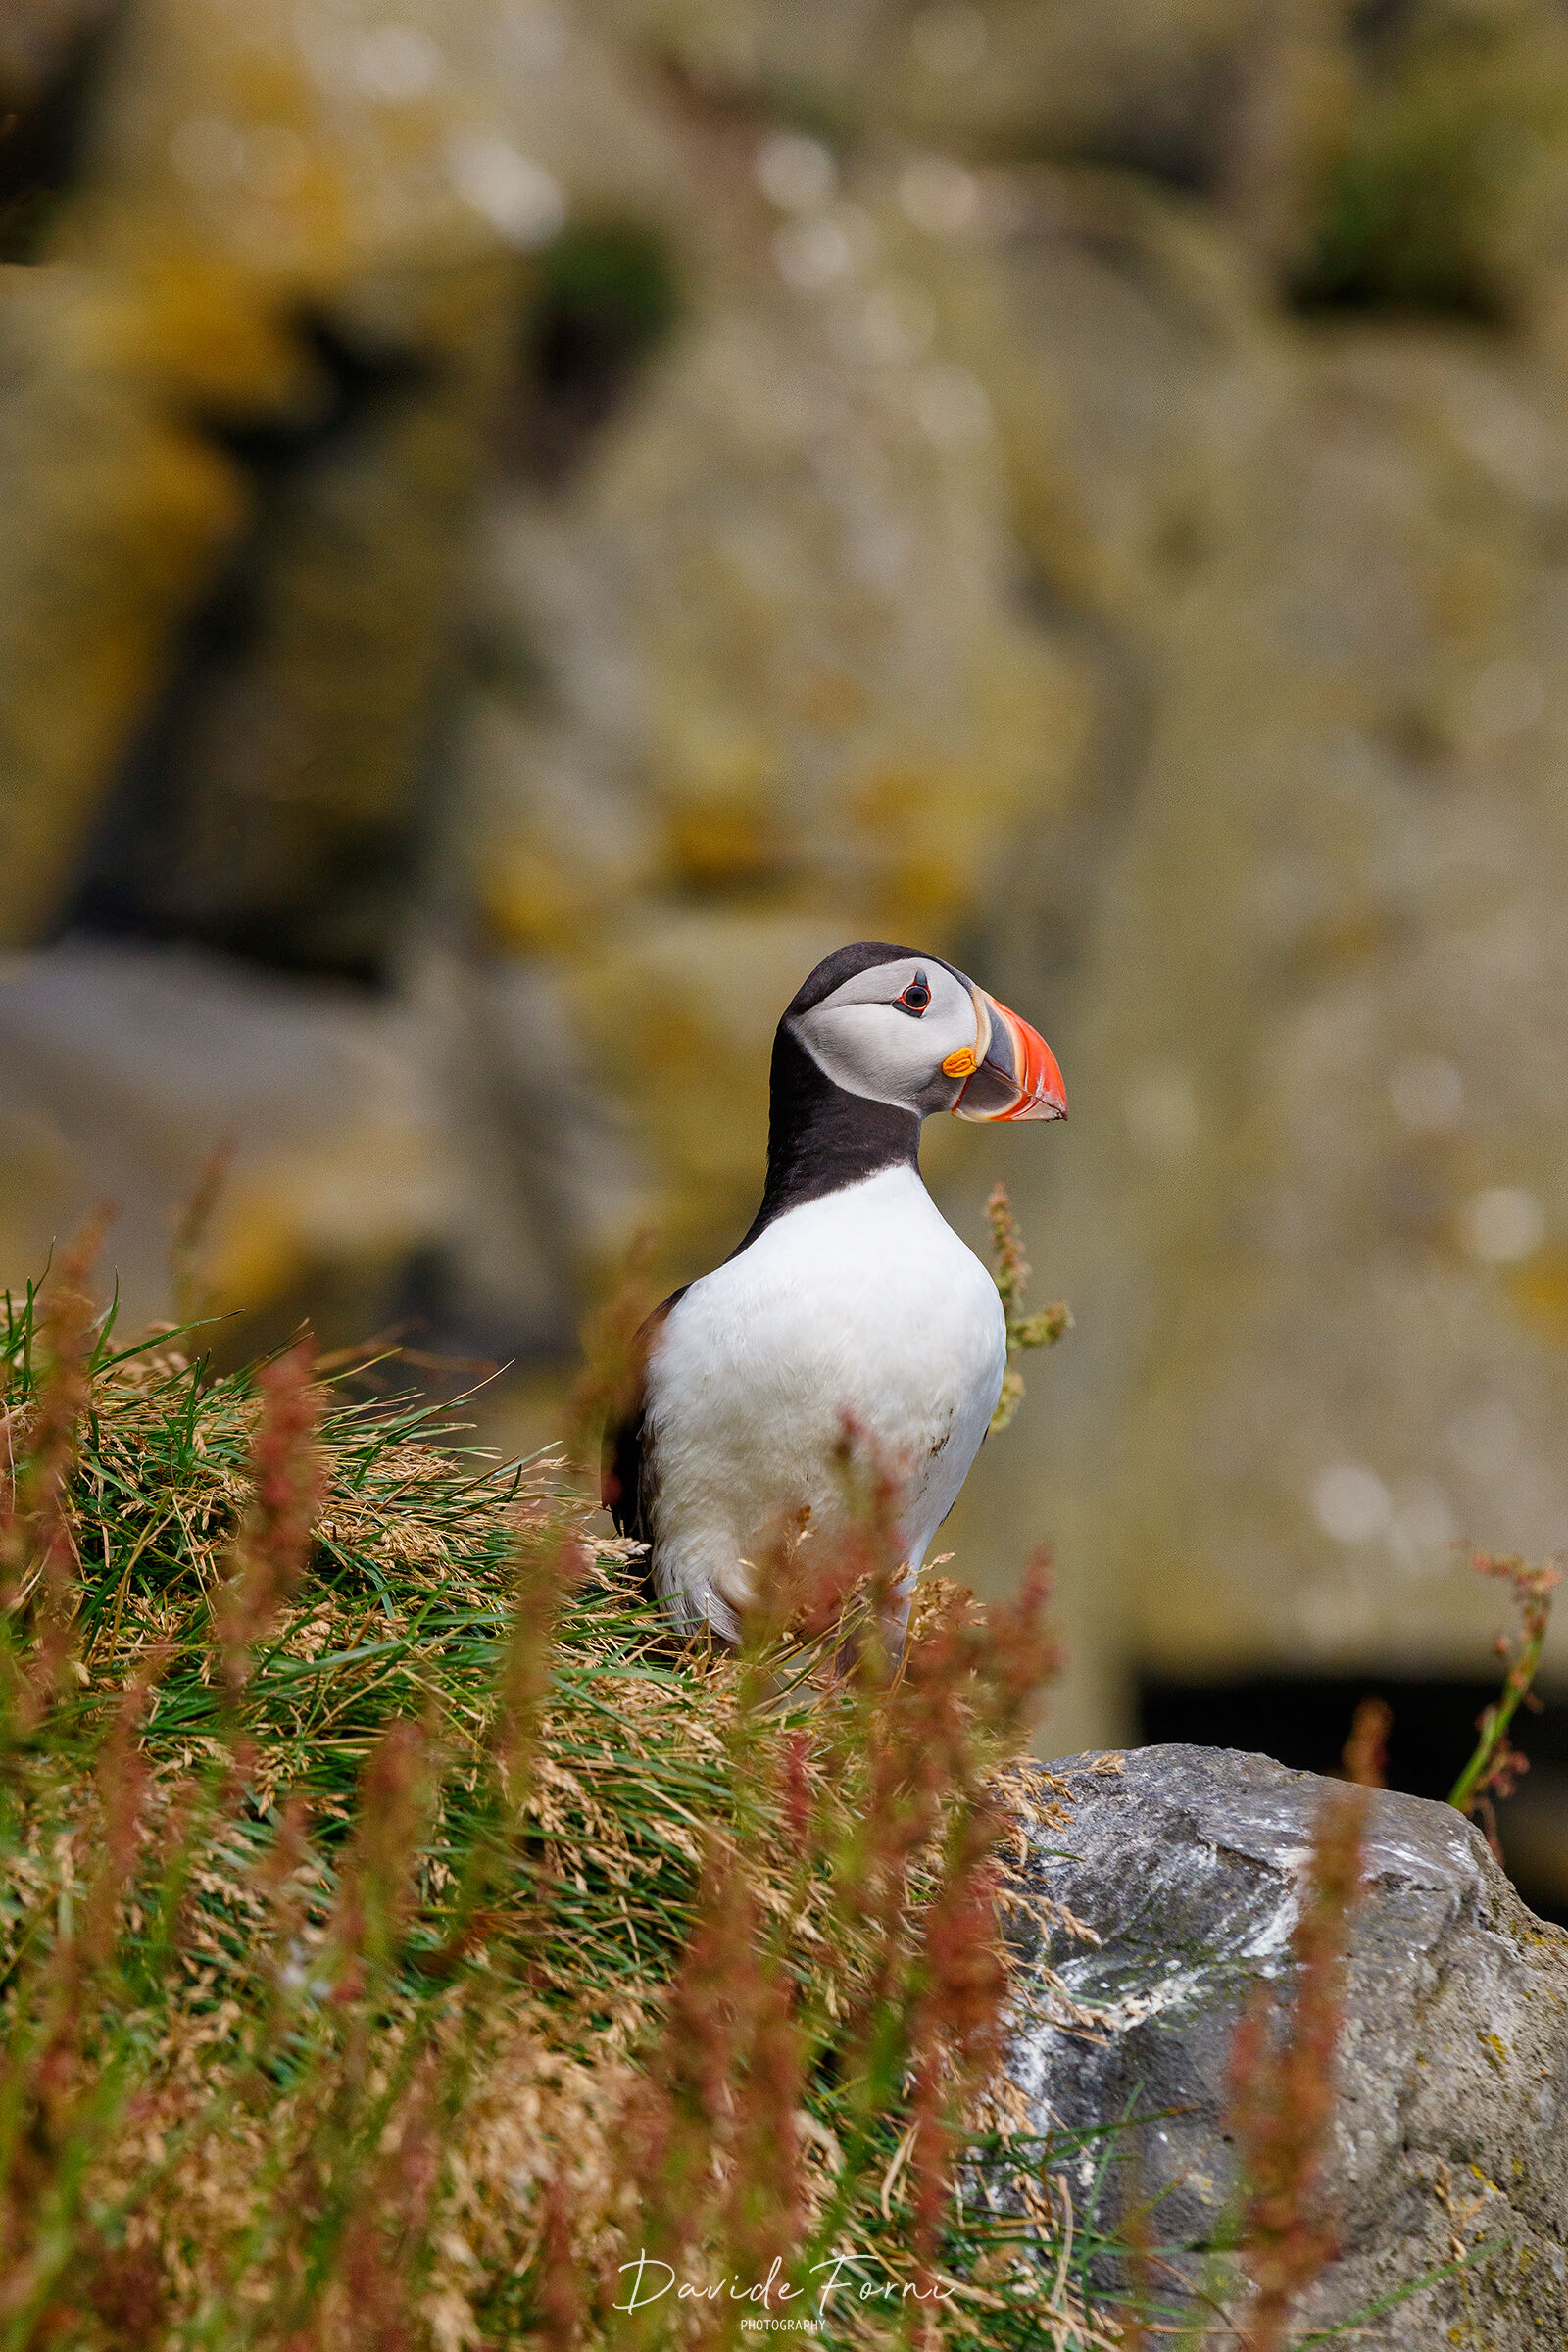 Close encounter with the Puffin...